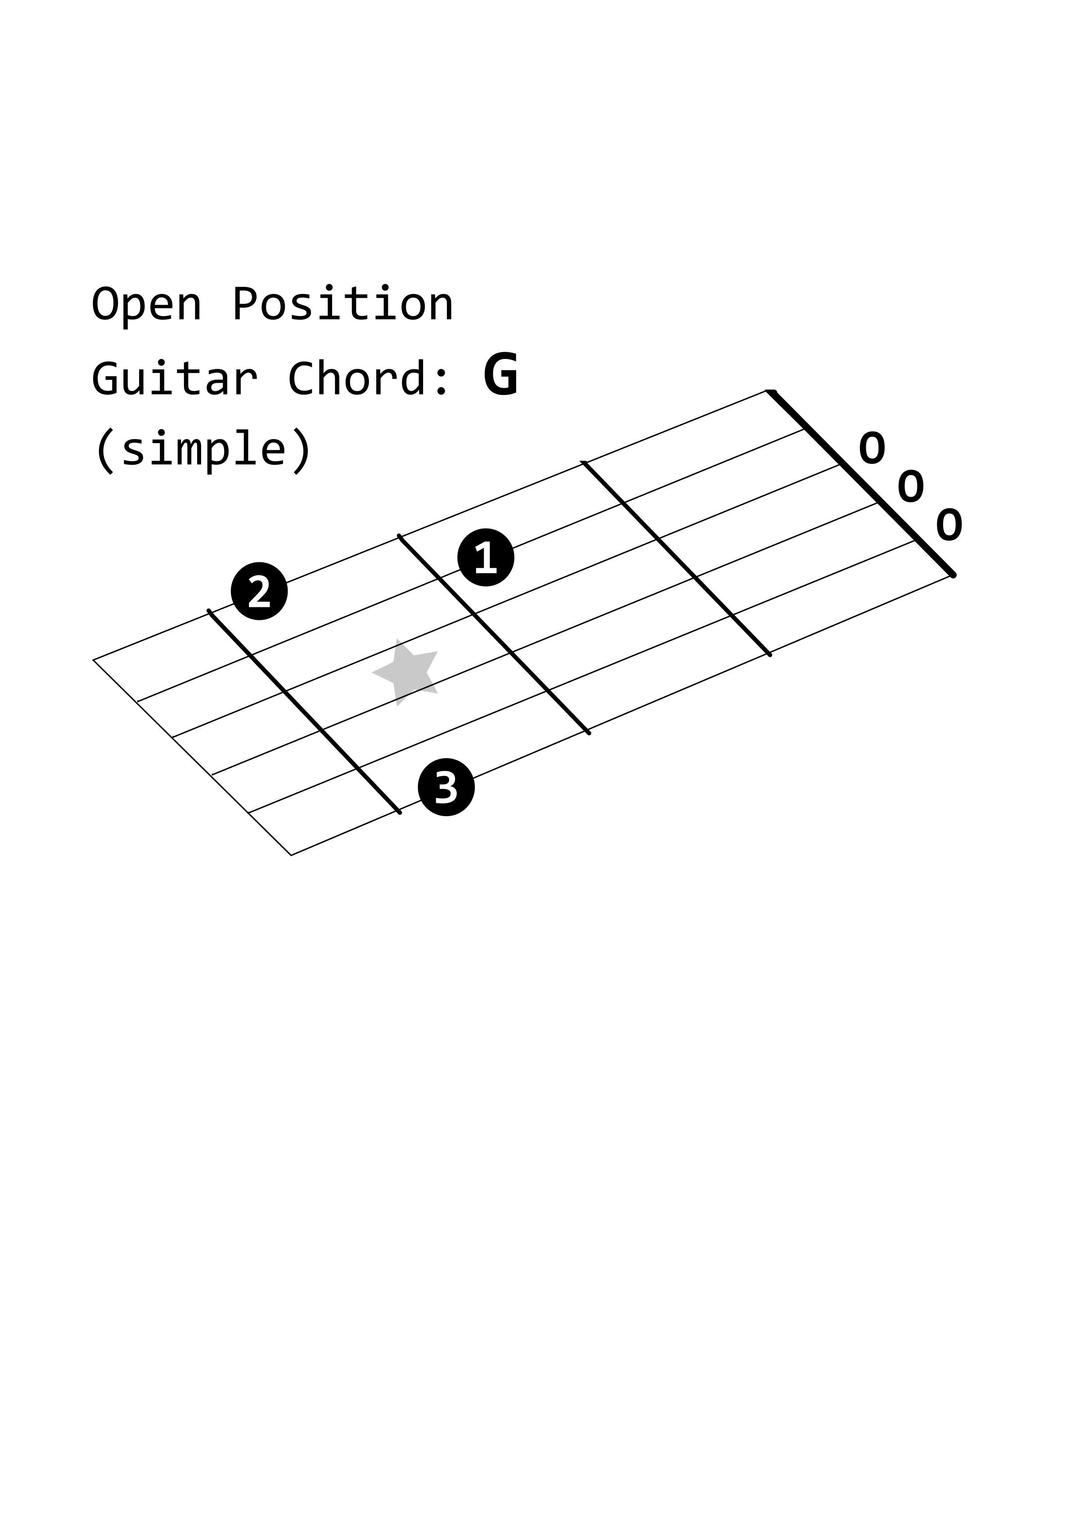 Open Position Guitar Chord: G (simple) png transparent